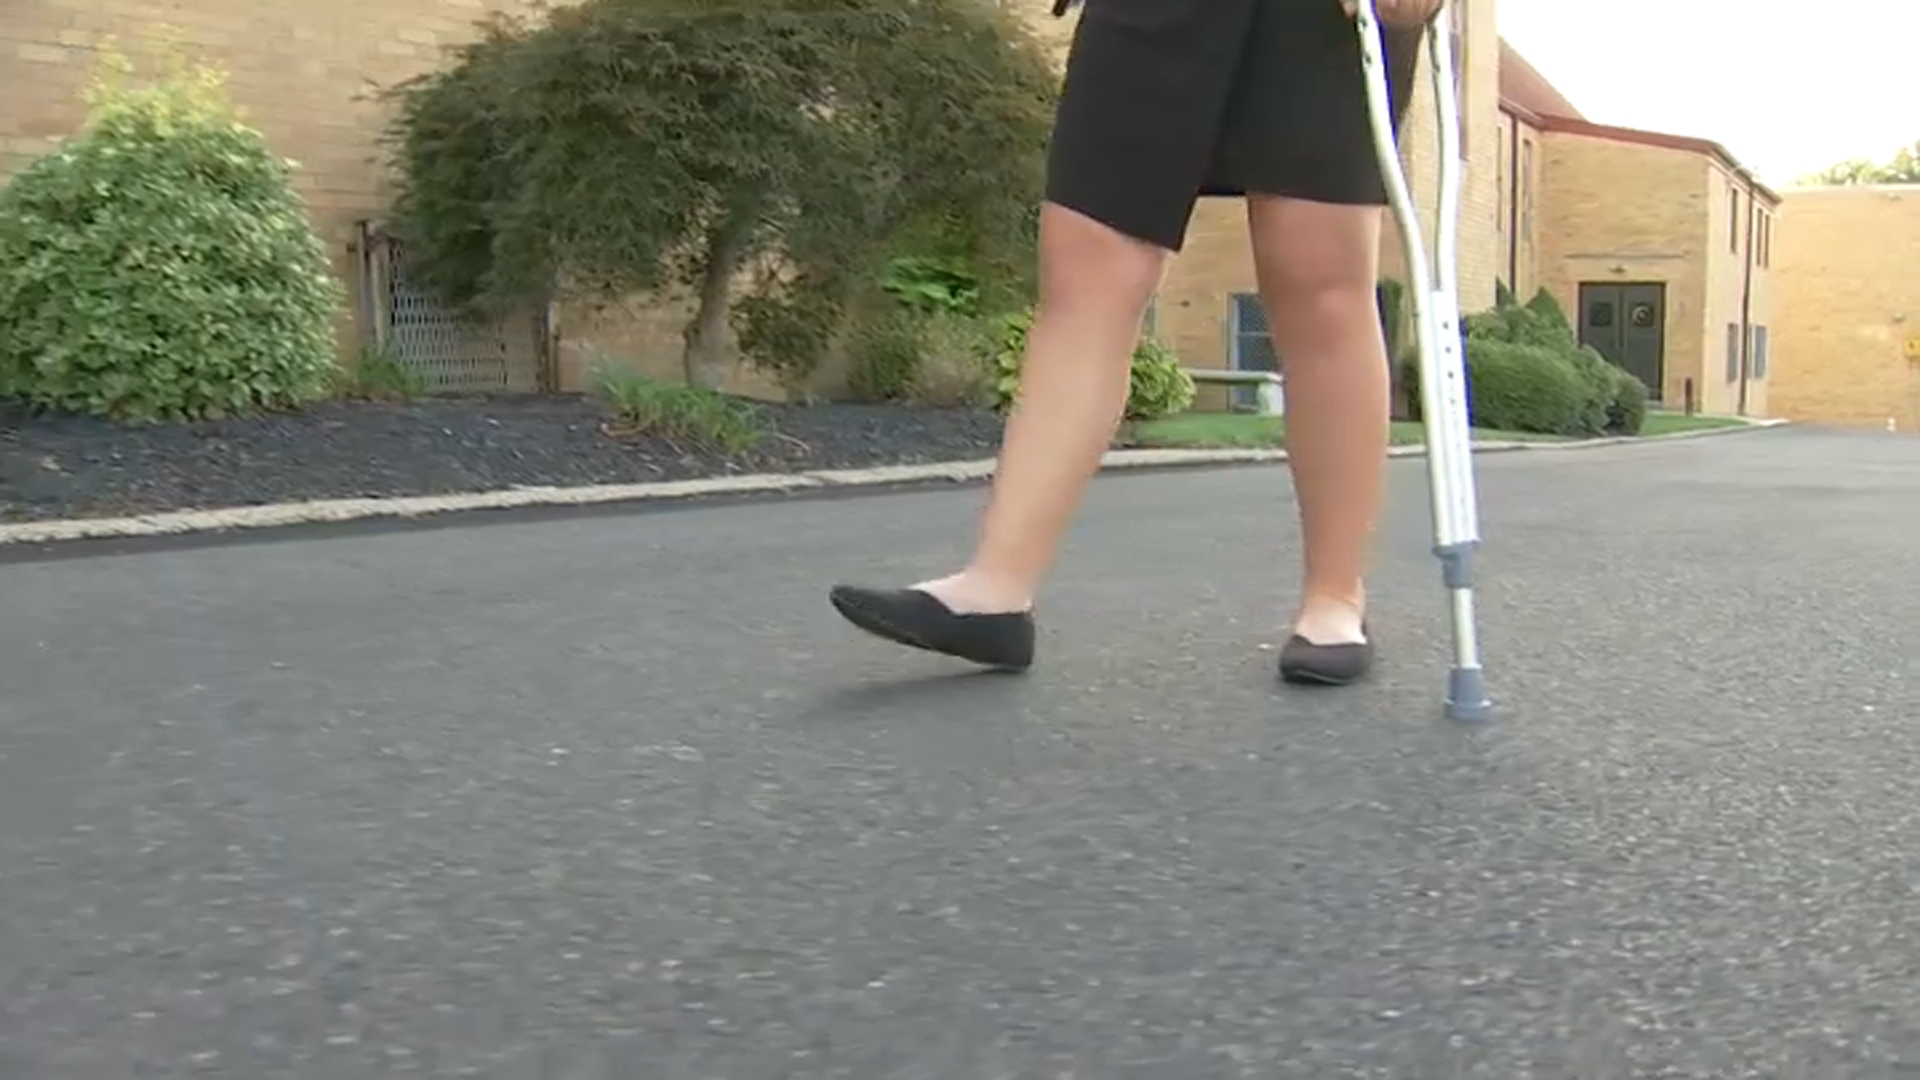 Canvassing on Crutches: Philly Woman Shot by Stray Bullet Now Back on Her Feet